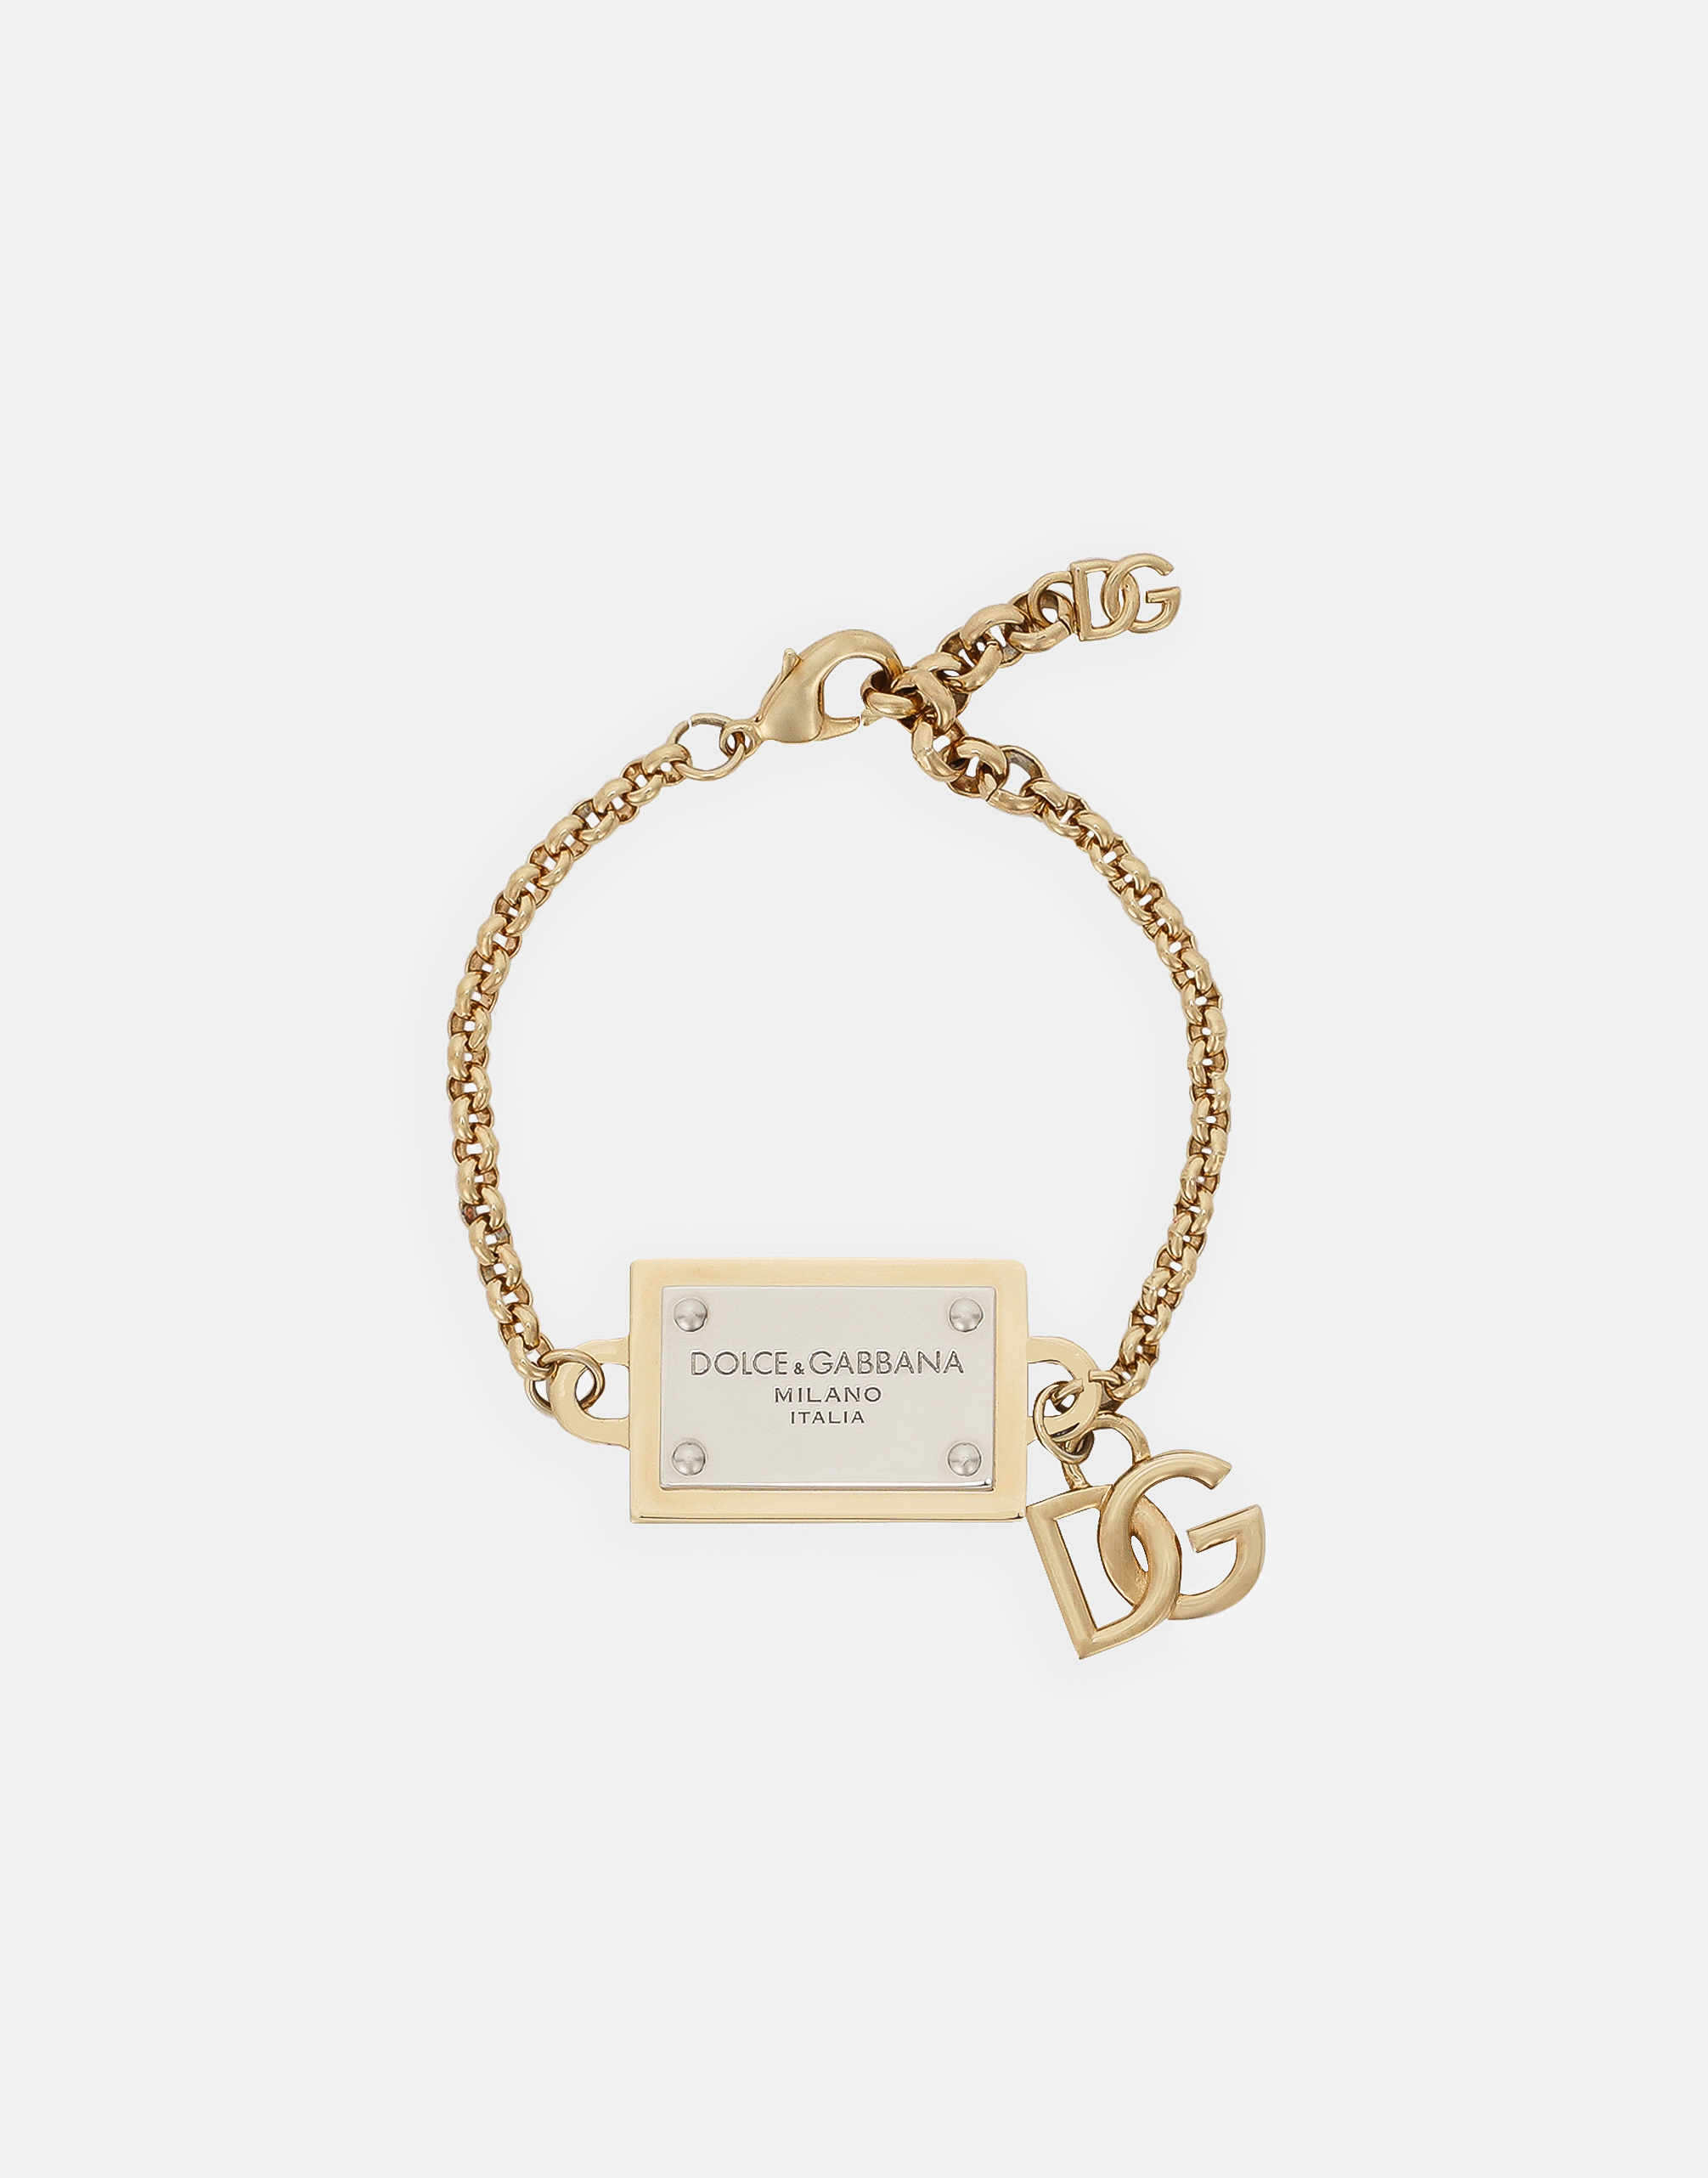 Dolce & Gabbana Bracelet With Dg And Logo Tag In Gold